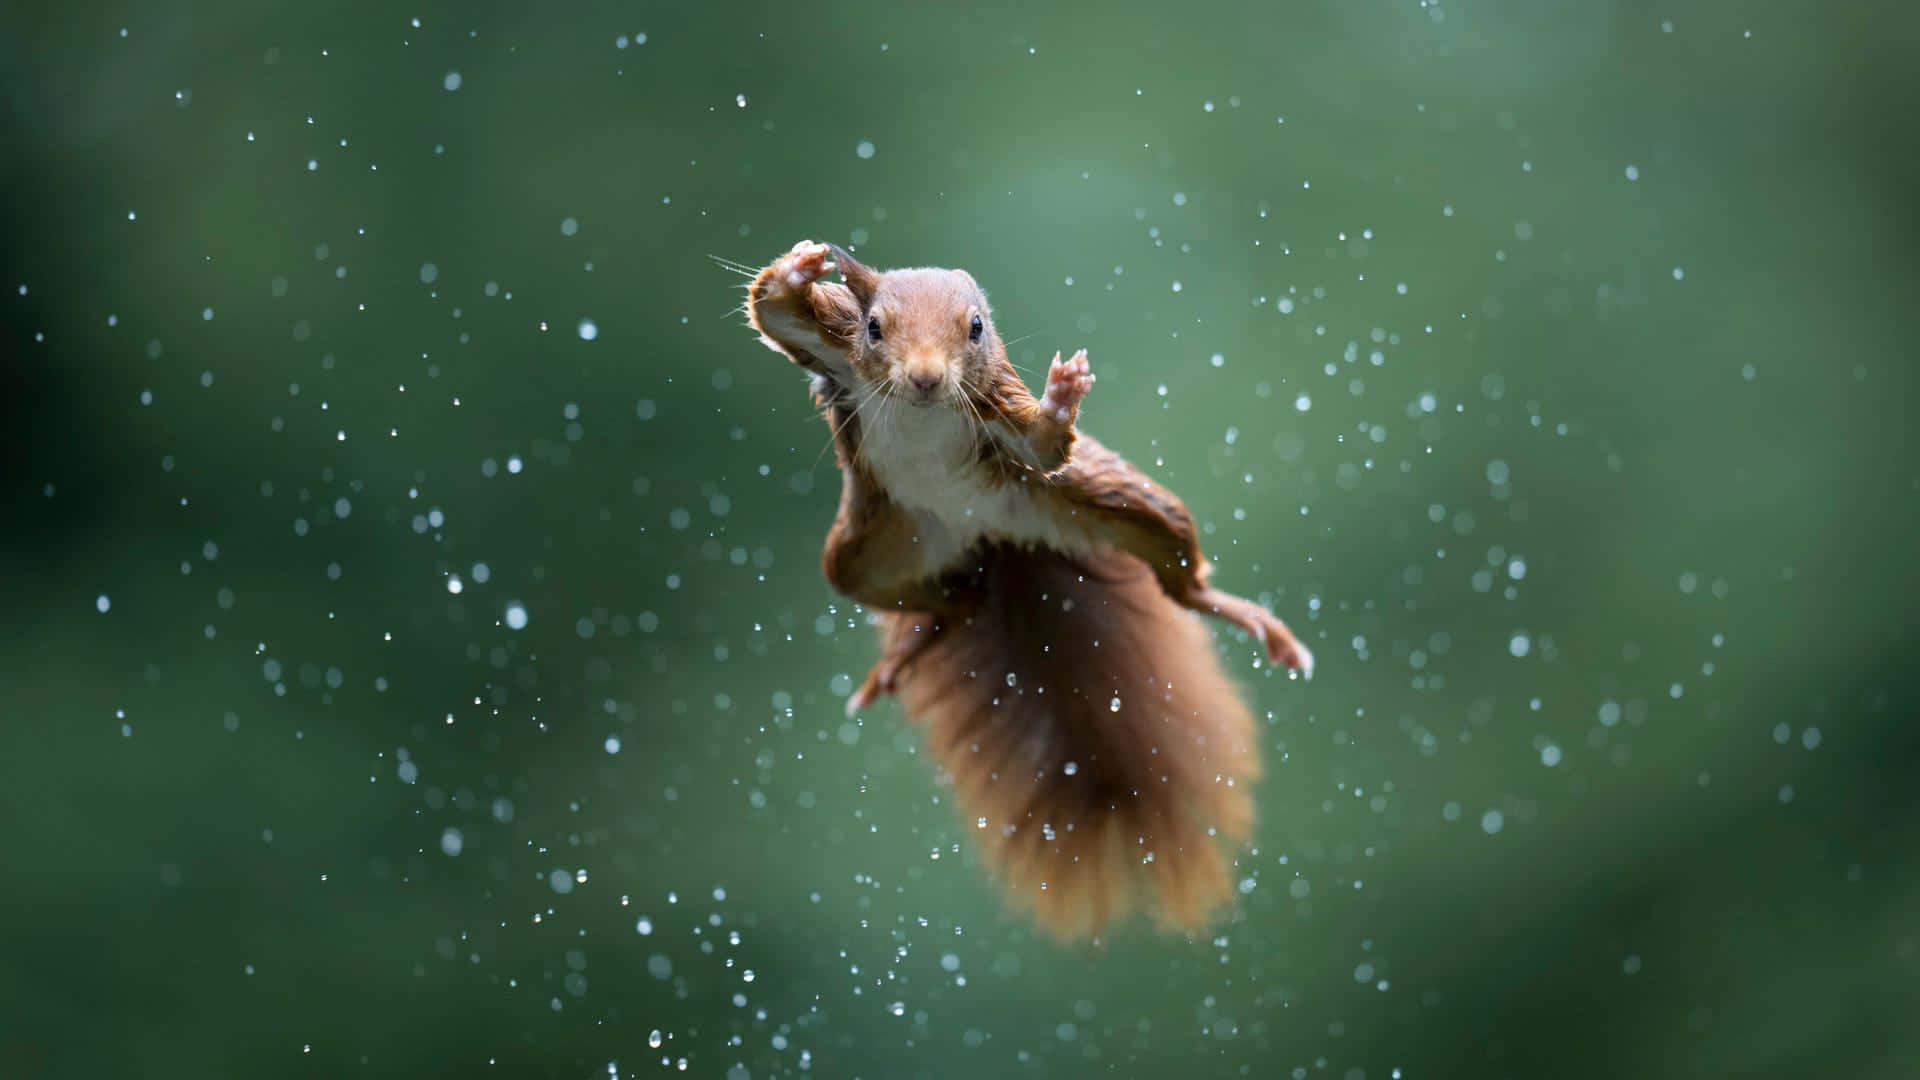 a squirrel jumping in the rain Wallpaper